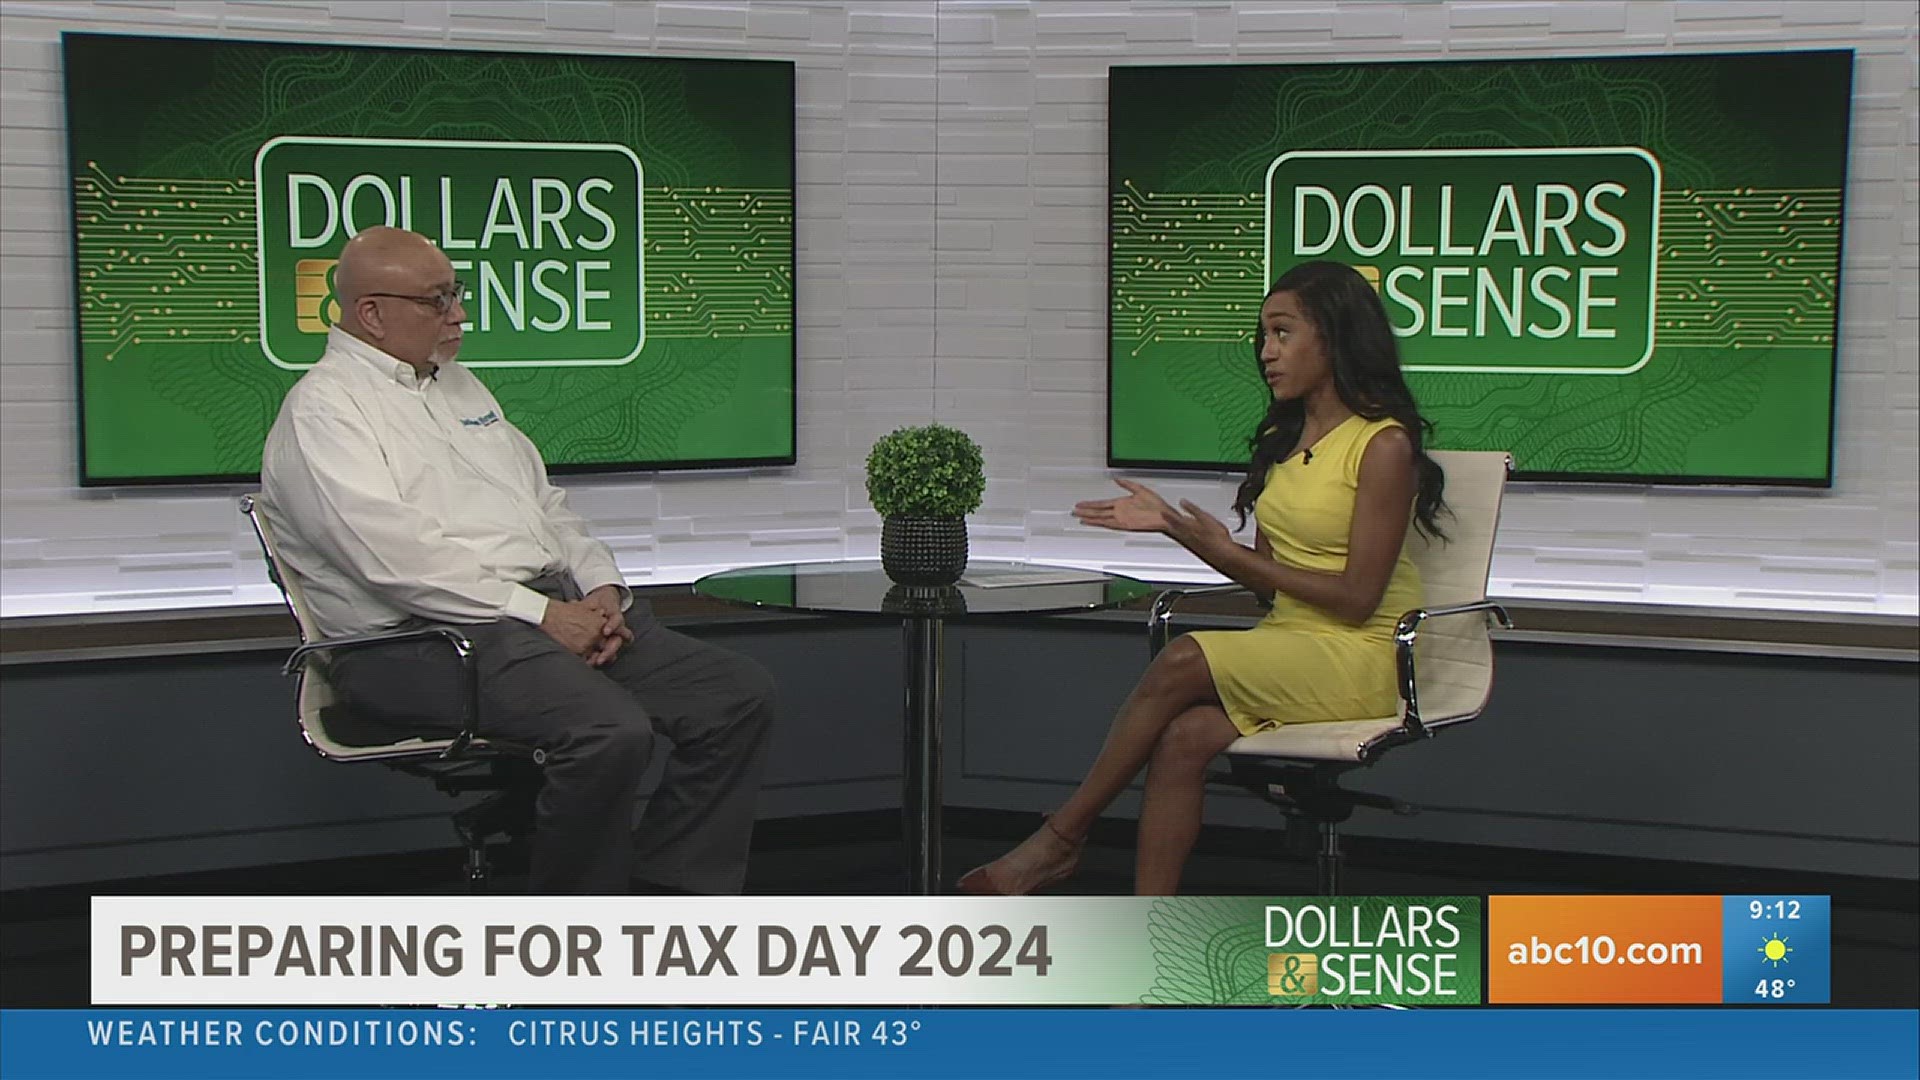 Jackson Hewitt franchise owner Nate Brooks shares tax season tips with the tax deadline coming up soon.